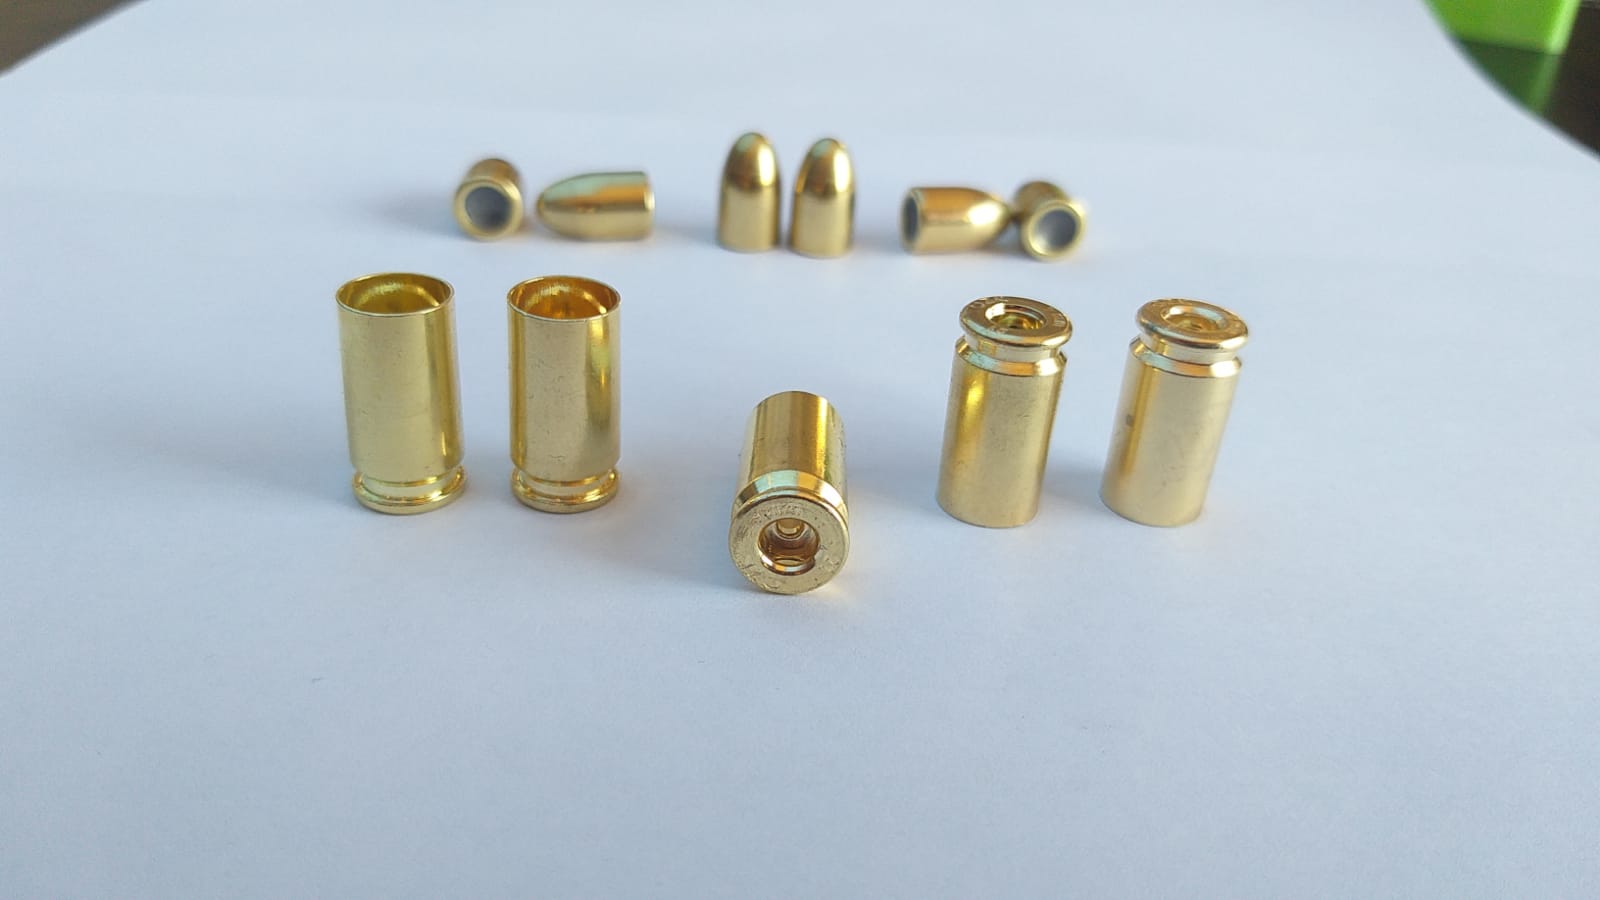 9mm FMJ 124 empty cases